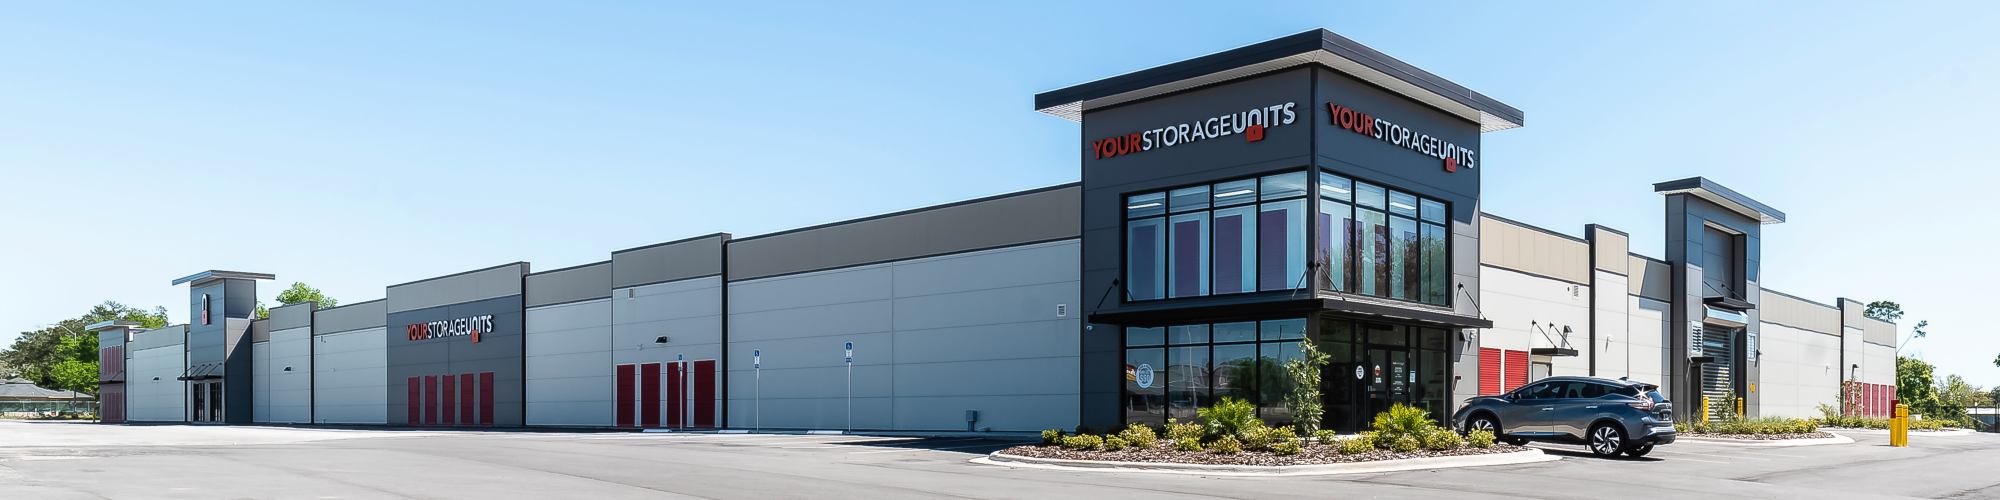 Accessibility Statement for Your Storage Units Ocoee in Ocoee, Florida